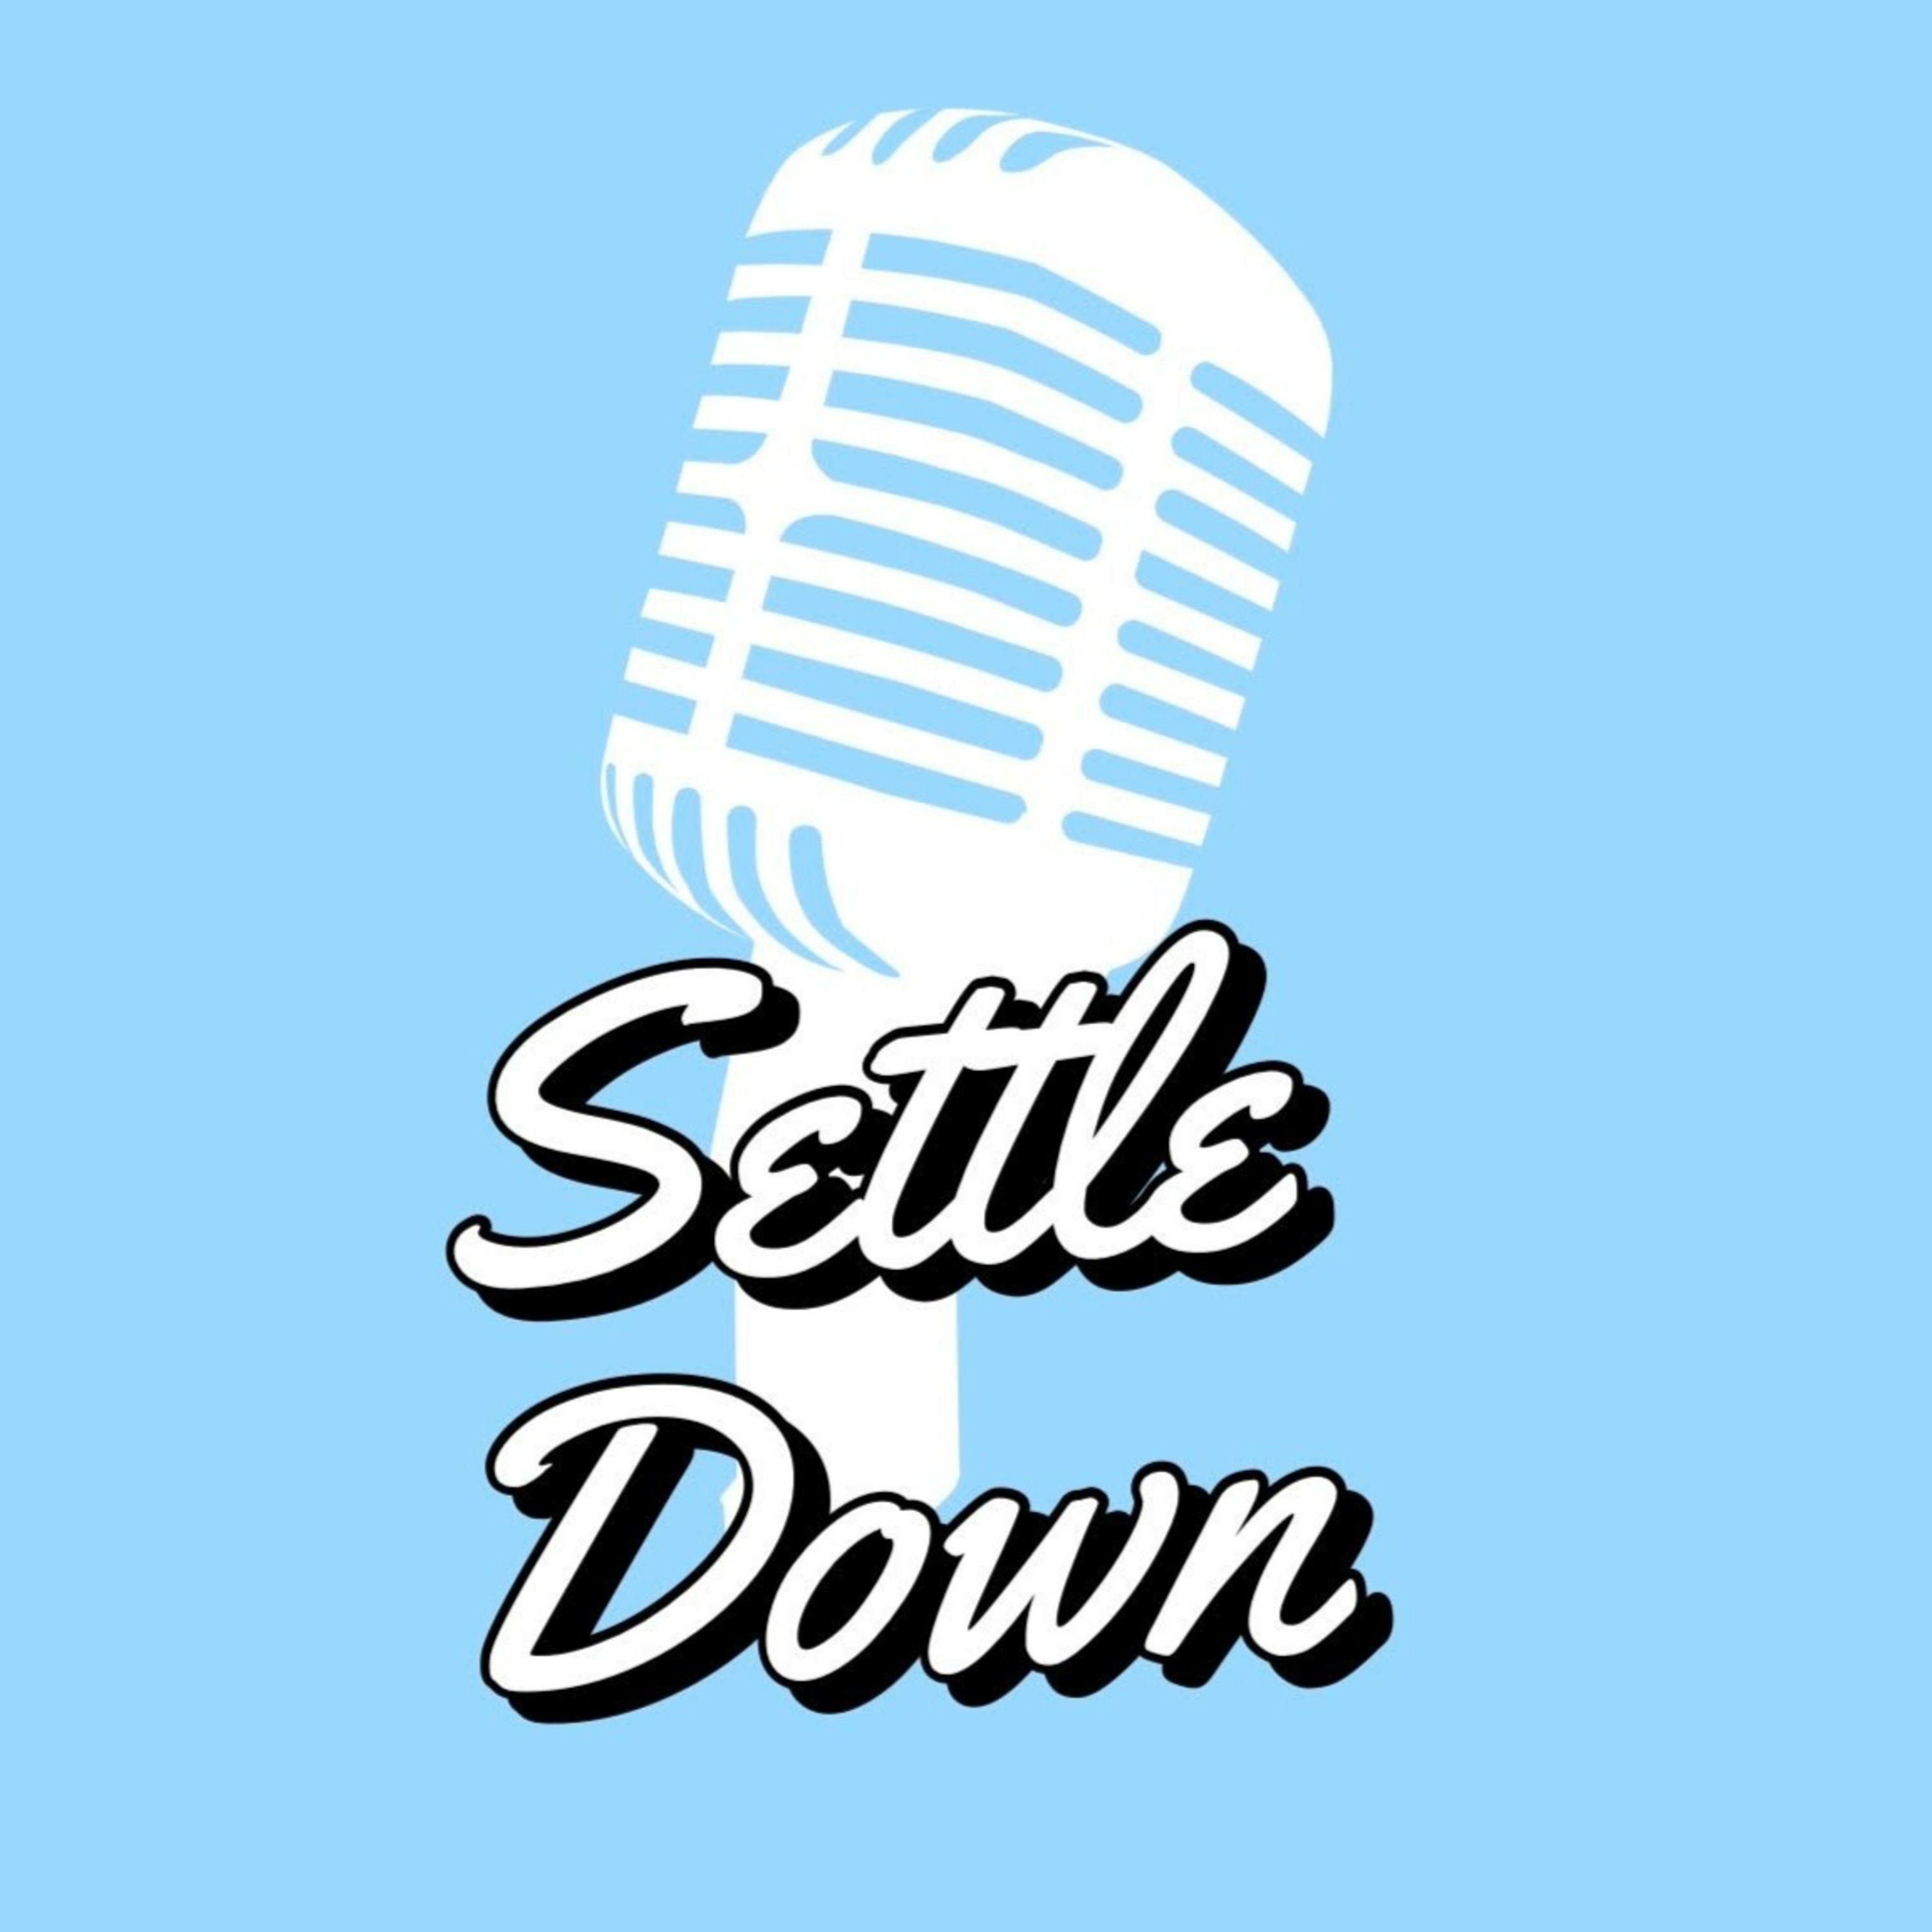 Settle Down Podcast Episode 10 - Official Bracket and Special Guest Zach Covert